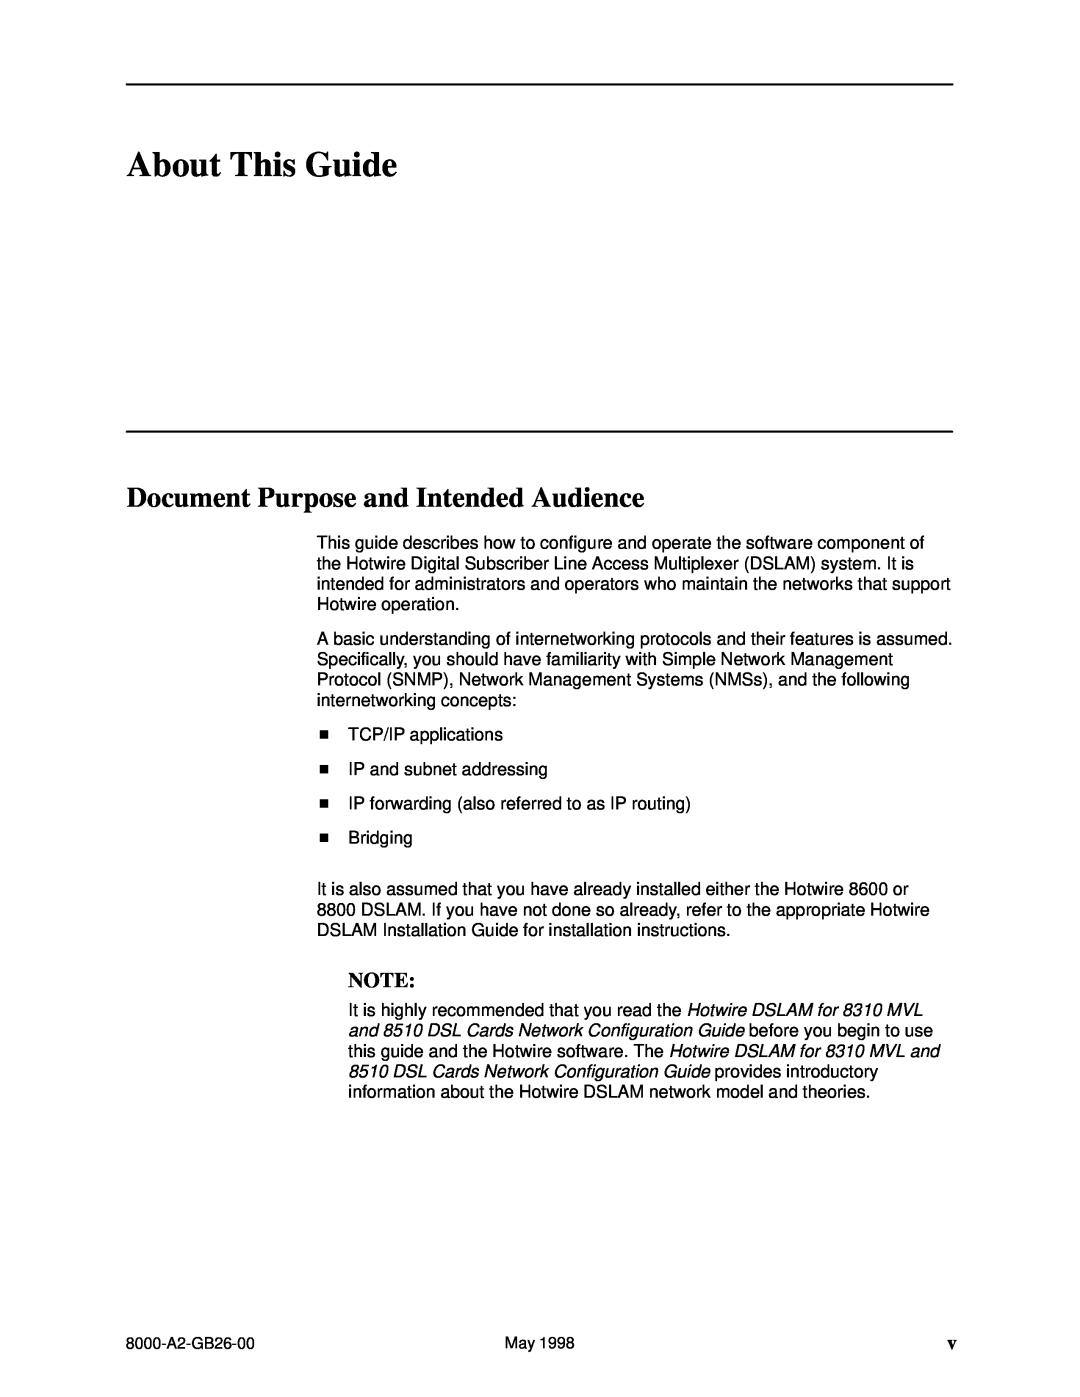 Paradyne 8510 DSL, 8310 MVL manual About This Guide, Document Purpose and Intended Audience 